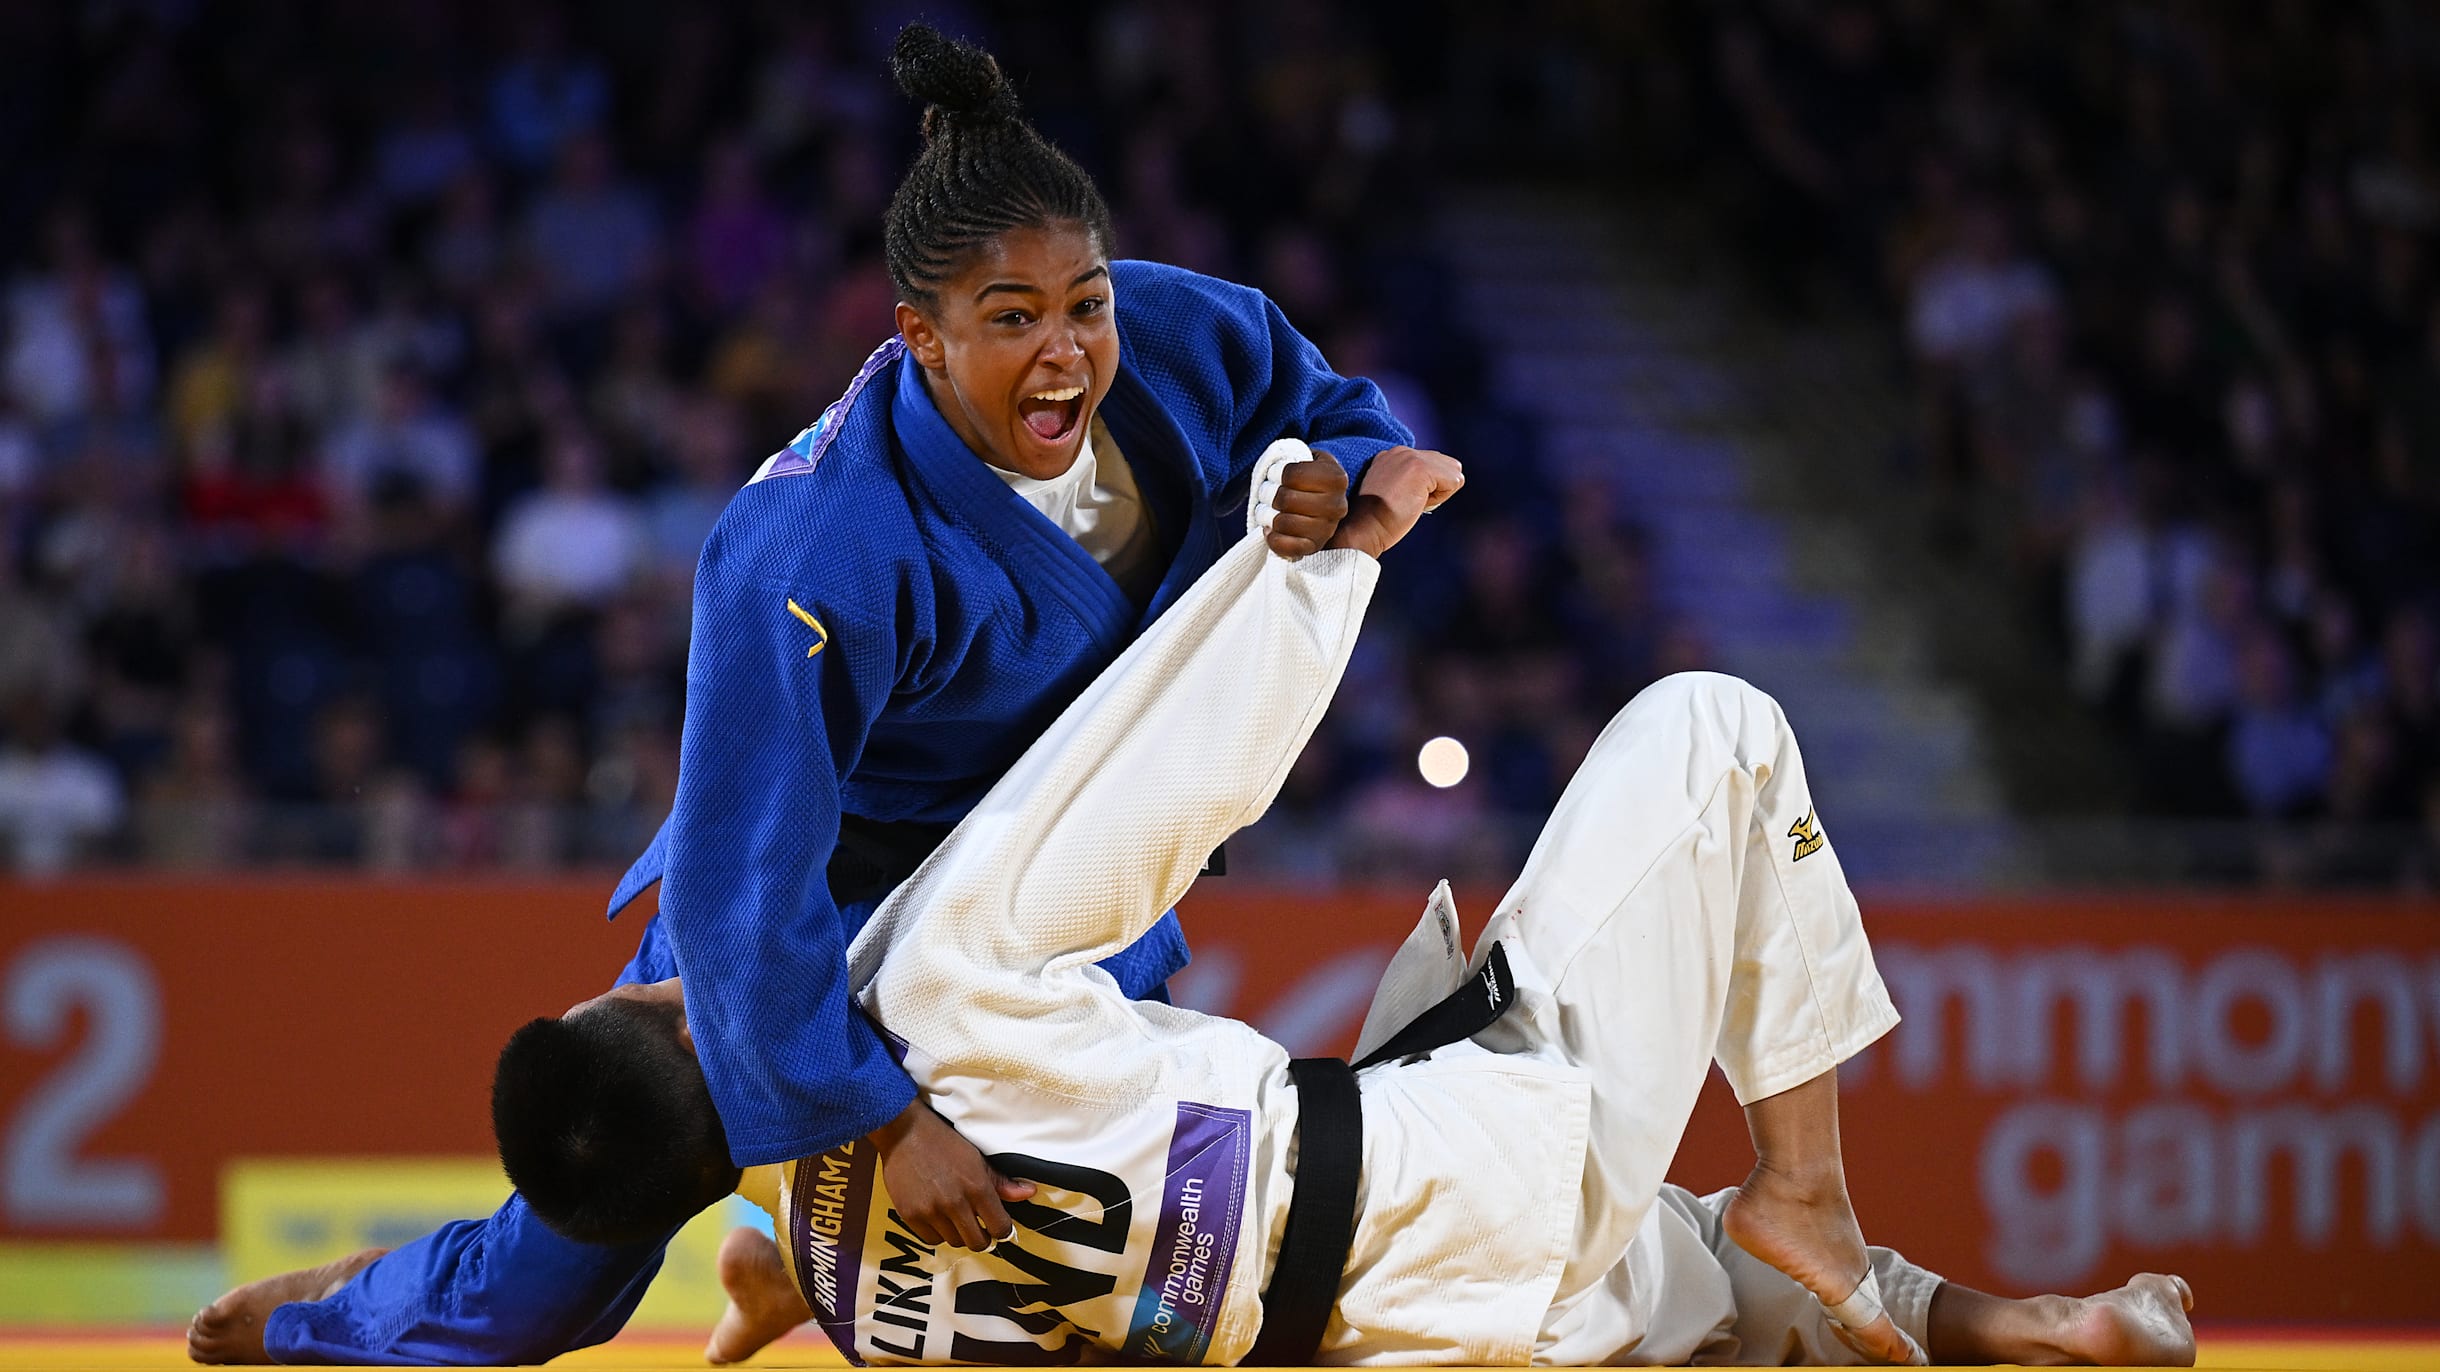 South Africa judo duo Geronay Whitebooi and Charné Griesel fighting for the marginalised